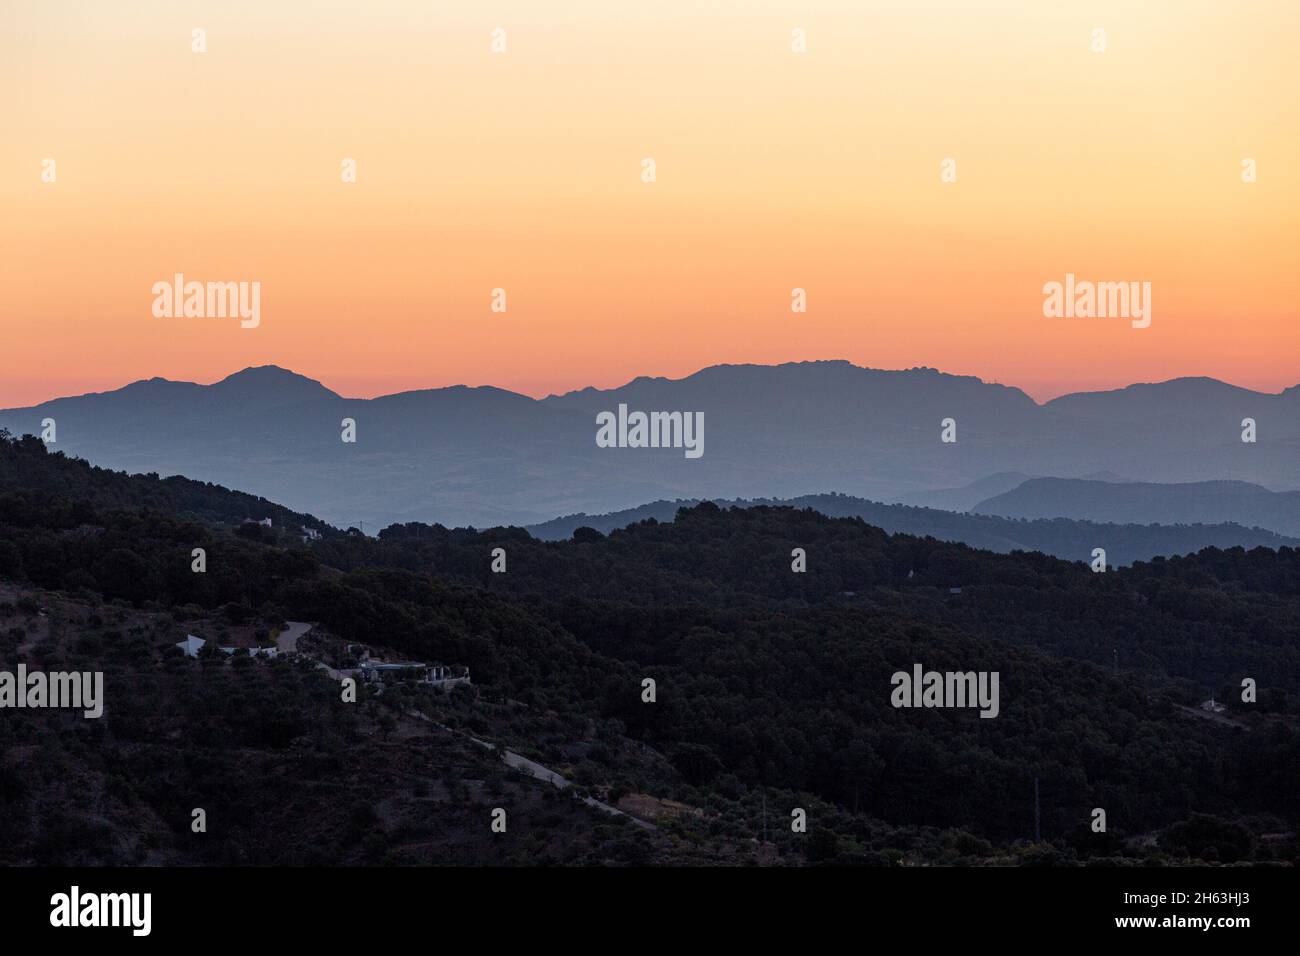 just a few minutes before sunrise: pitoresque landscape shot taken in andalusia,spain Stock Photo